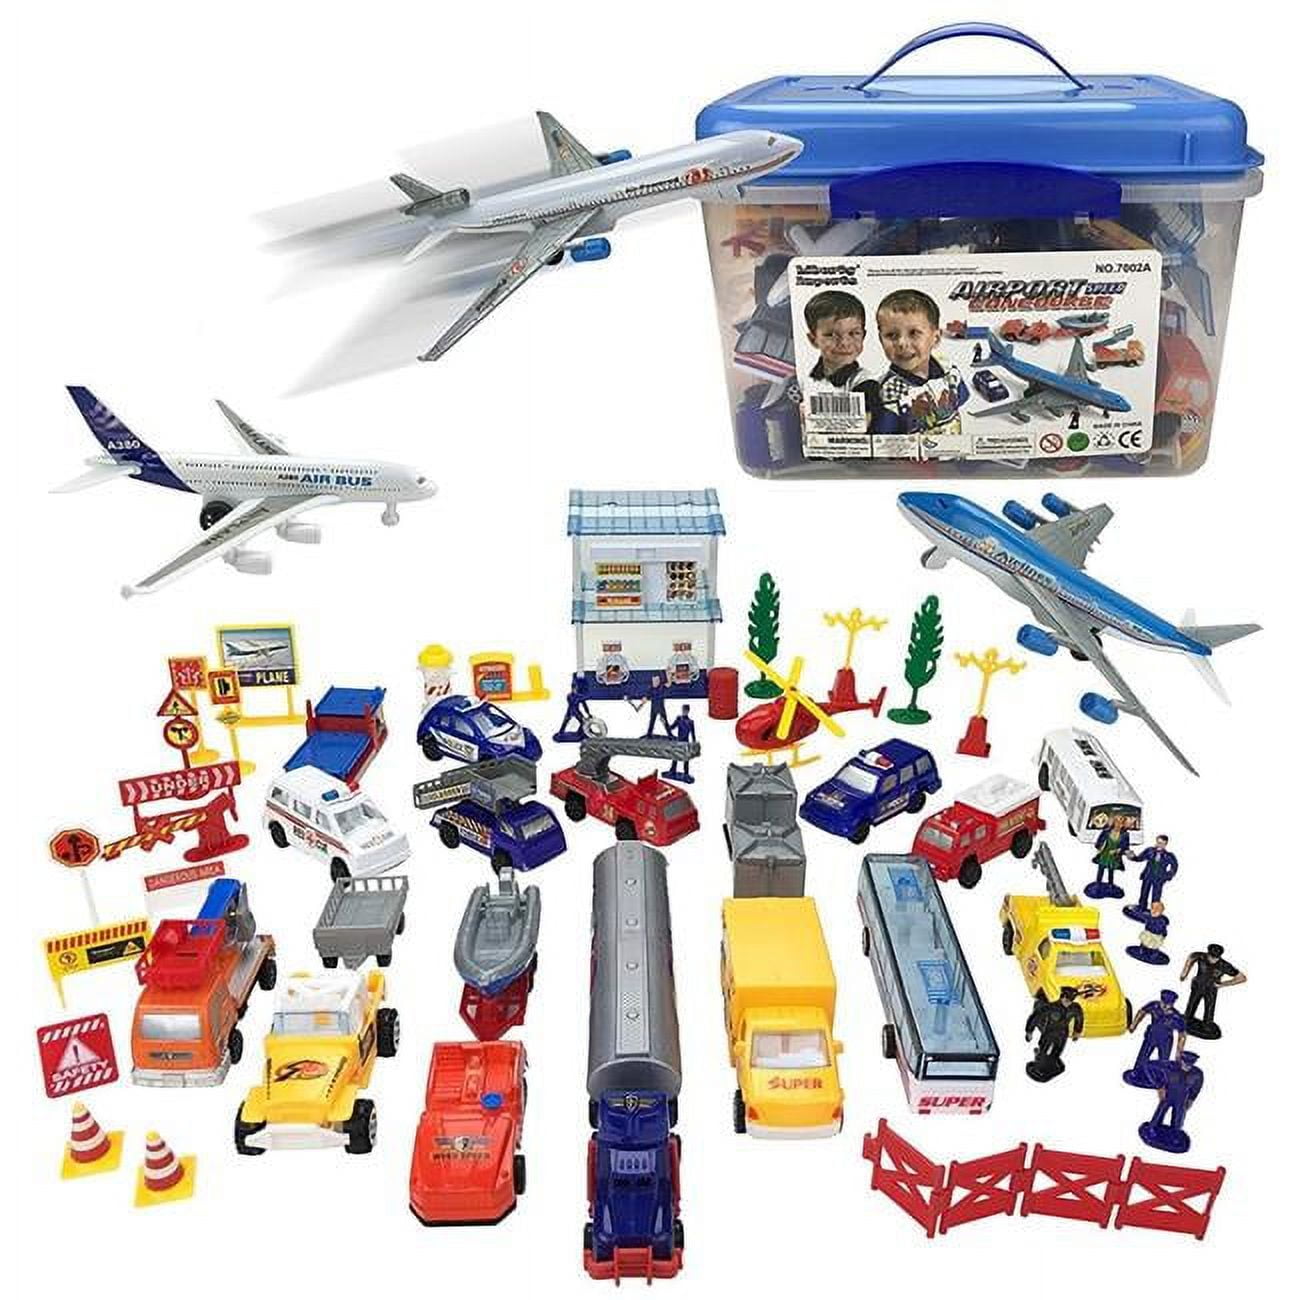 Ps02a Airport Play Set - 57 Piece